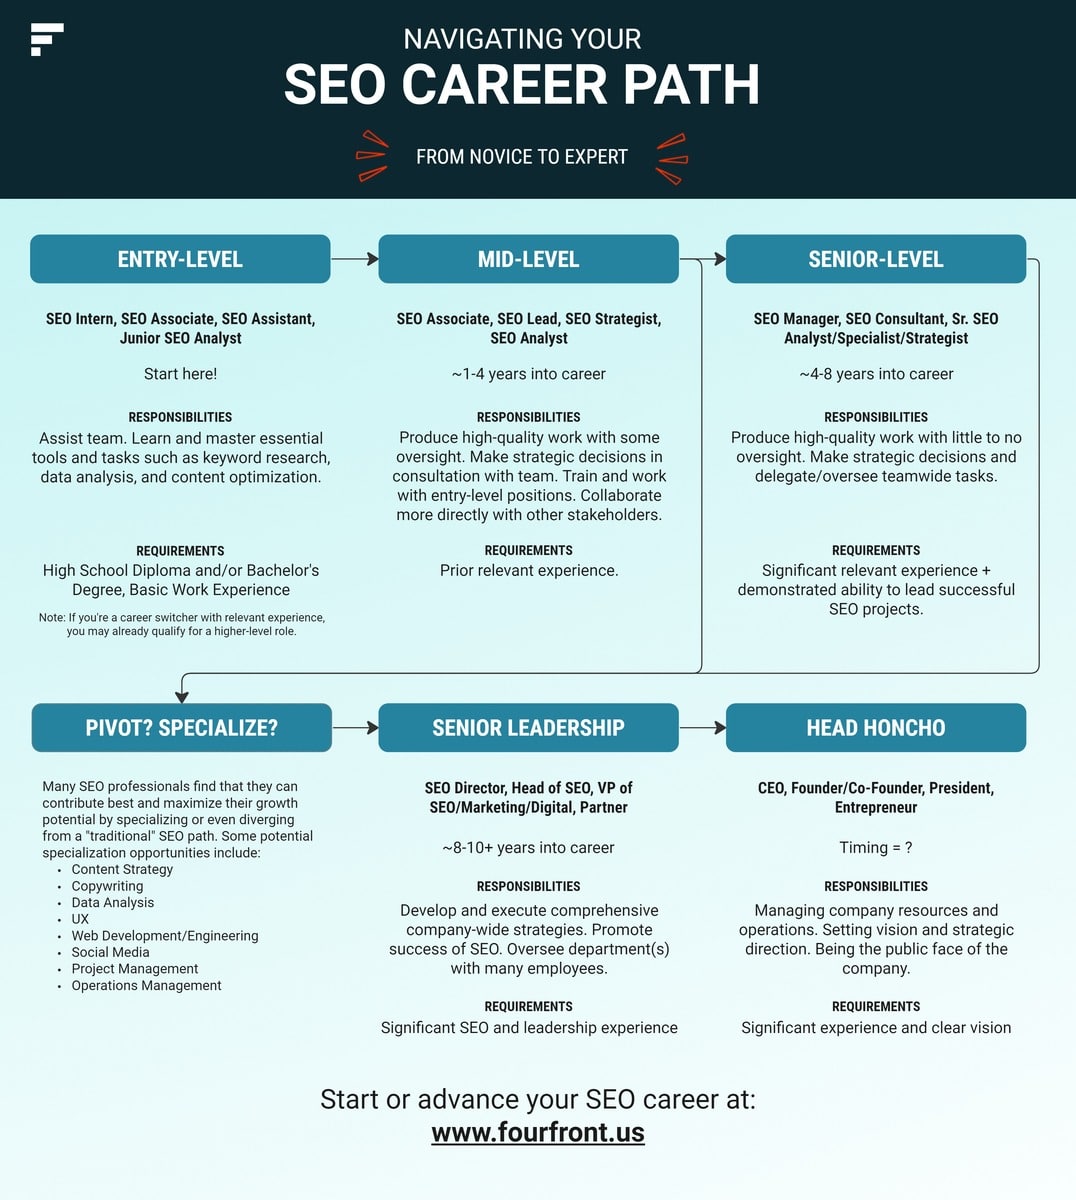 Infographic: Navigating Your SEO Career Path, from novice to expert. The flowchart shows roles, responsibilities, and requirements from entry-level, through mid- and senior-level roles, all the way up to Head Honcho.